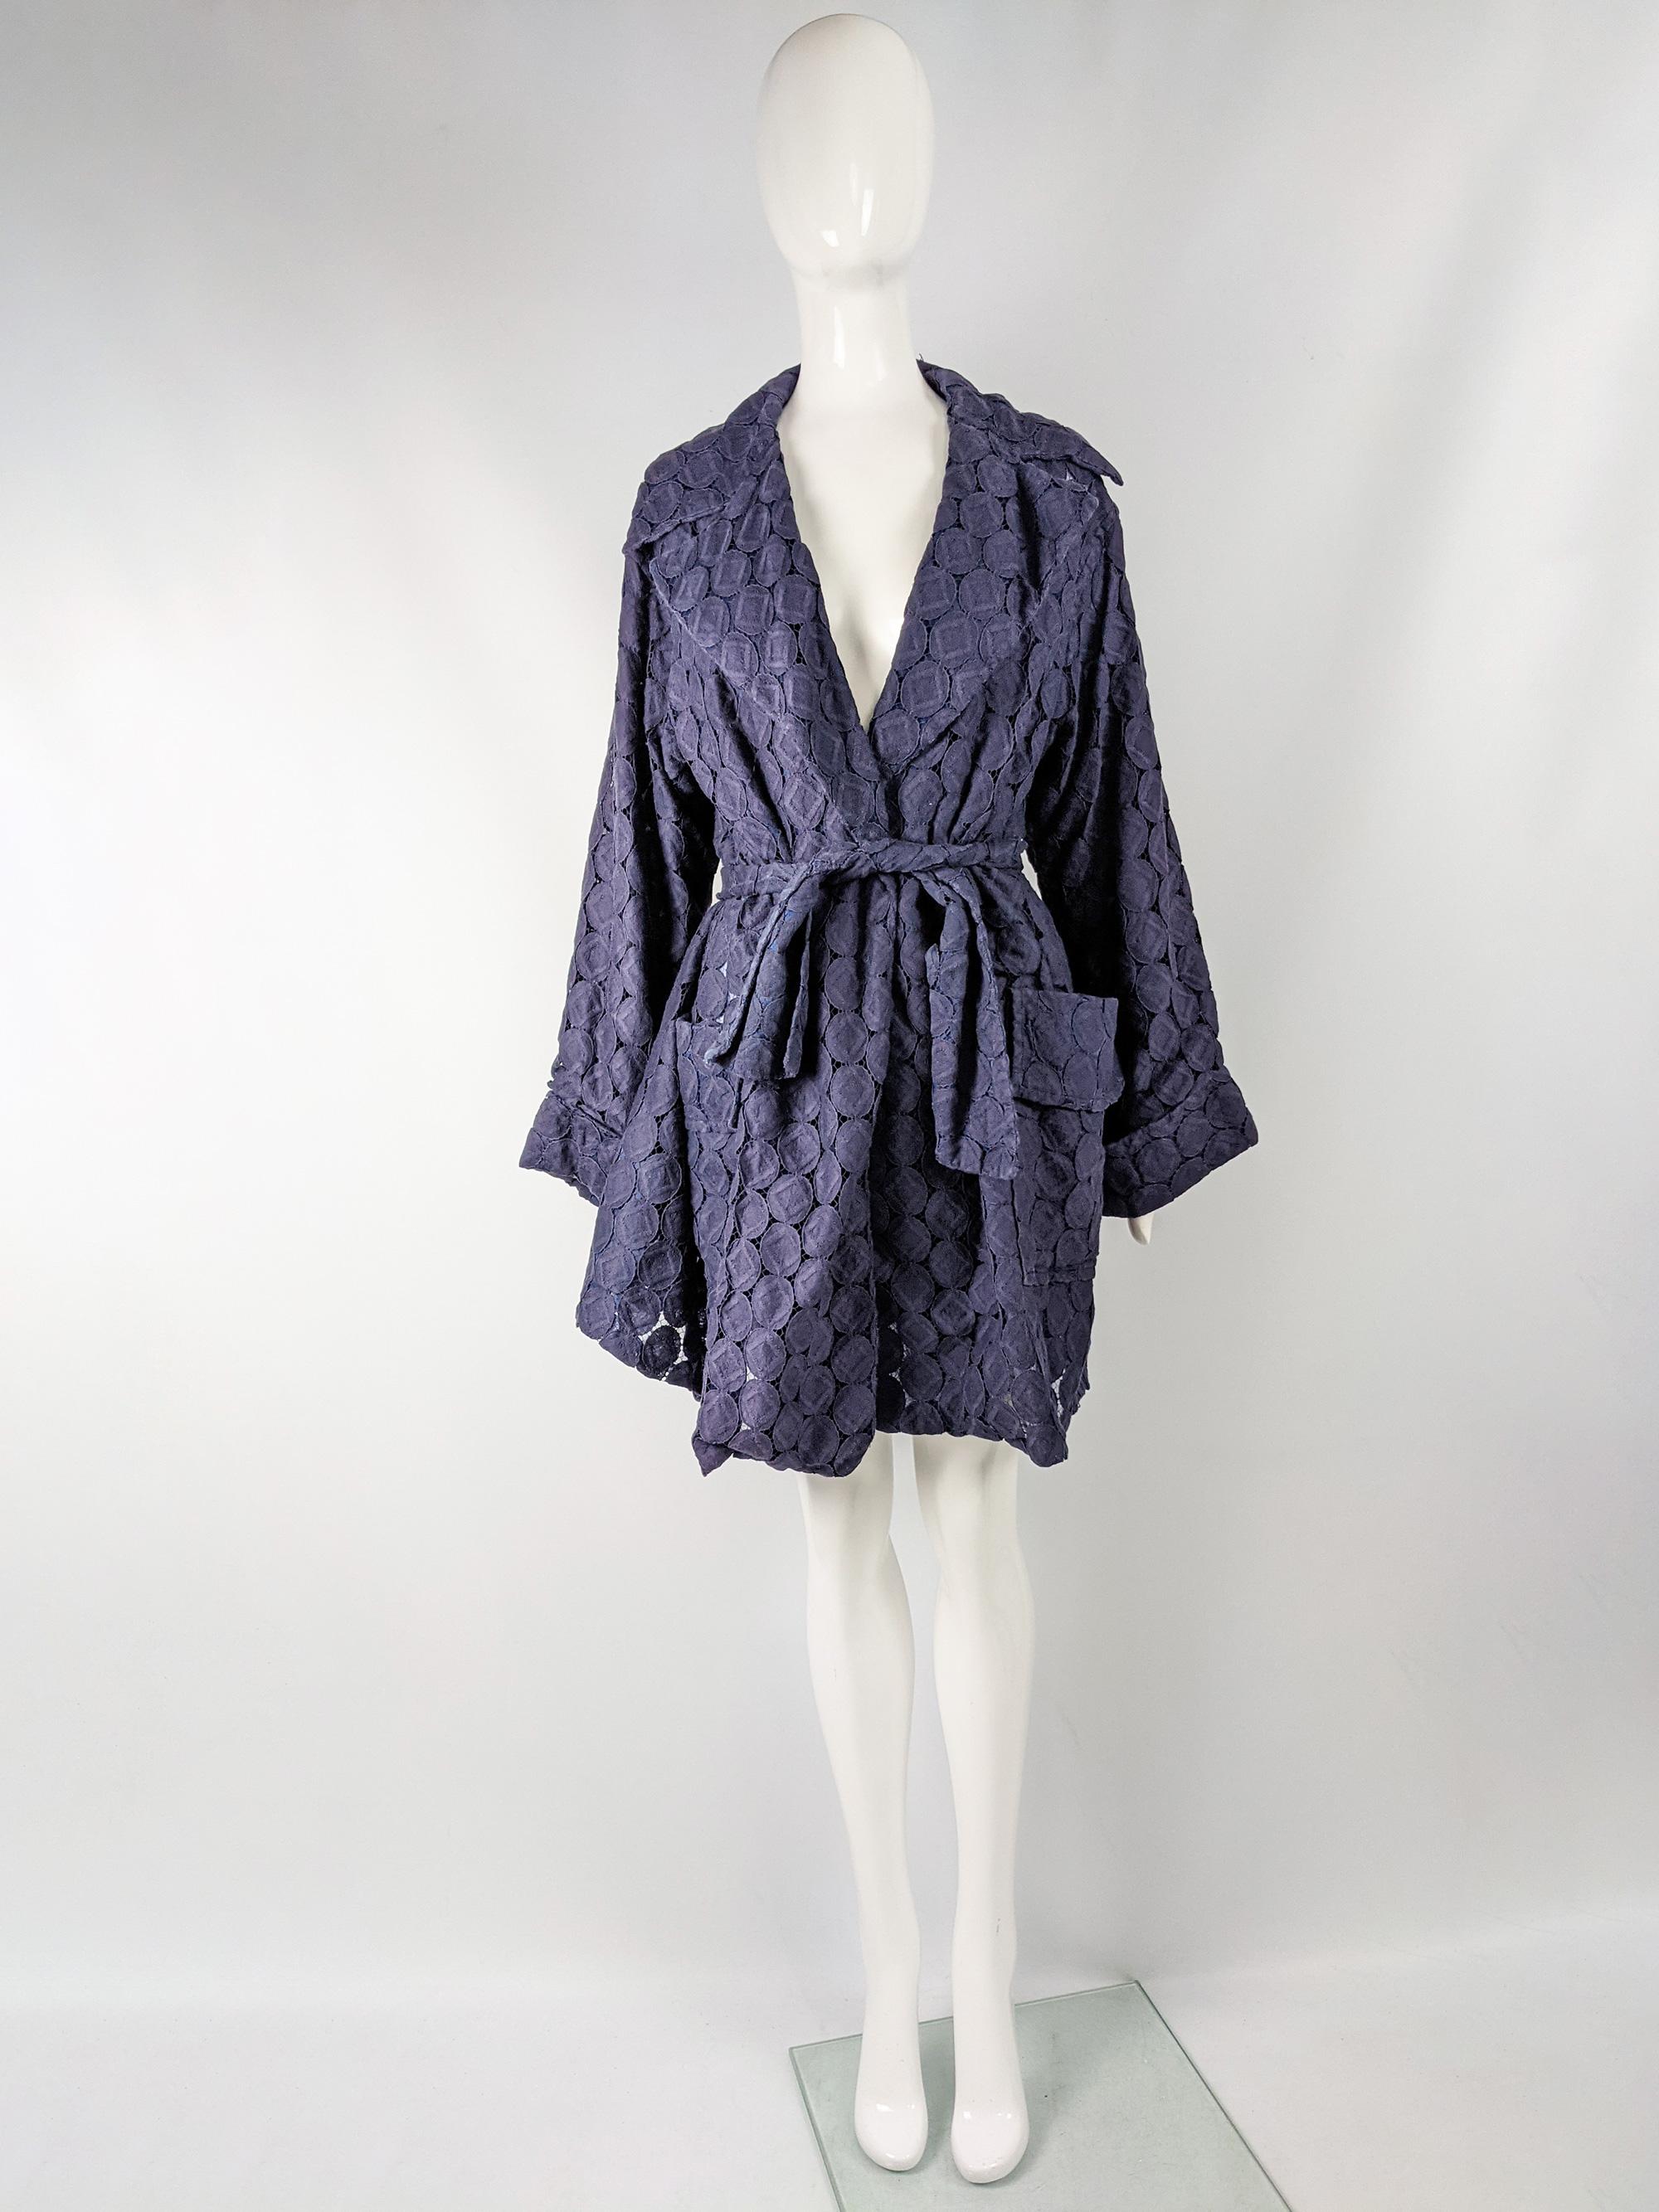 A vintage womens day to night jacket by Myrene Premonville from the S/S 91 collection (the twin of this jacket, with a slightly differing belt was shown on the runway). With a 50s inspired loose swing coat silhouette that can be cinched in with the